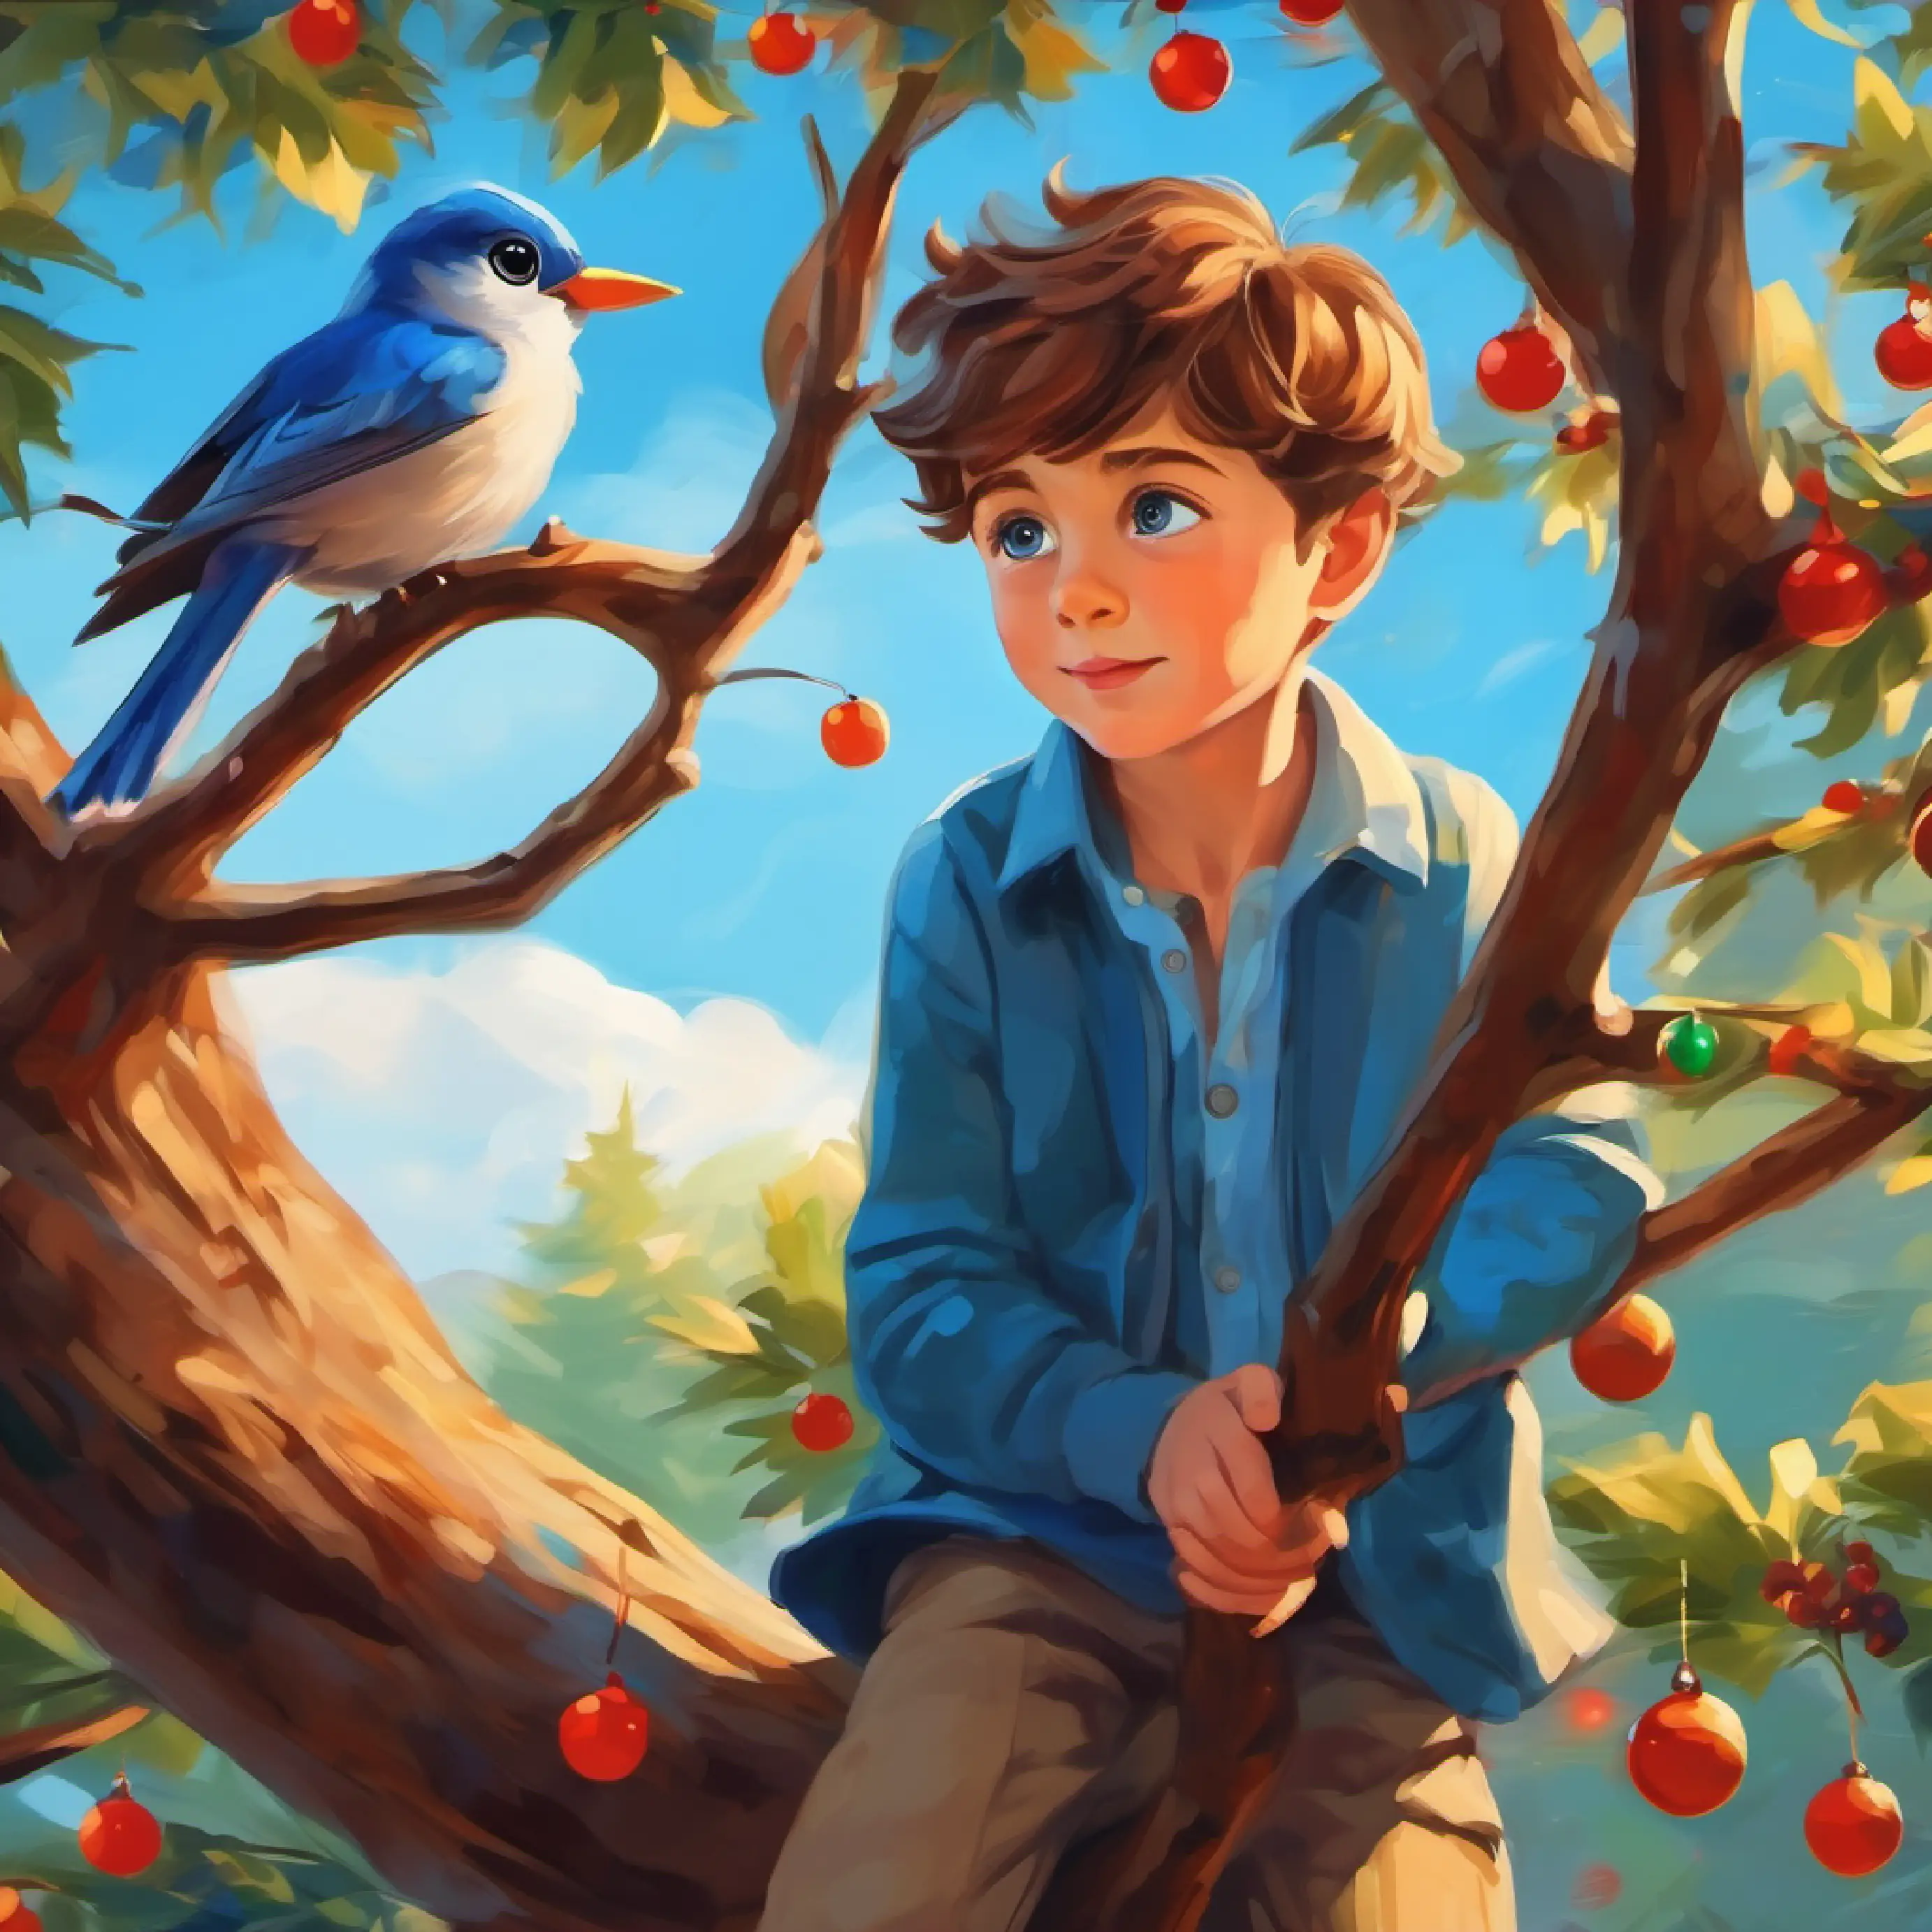 A young boy with brown hair and blue eyes spots a bird flying away from the tree.